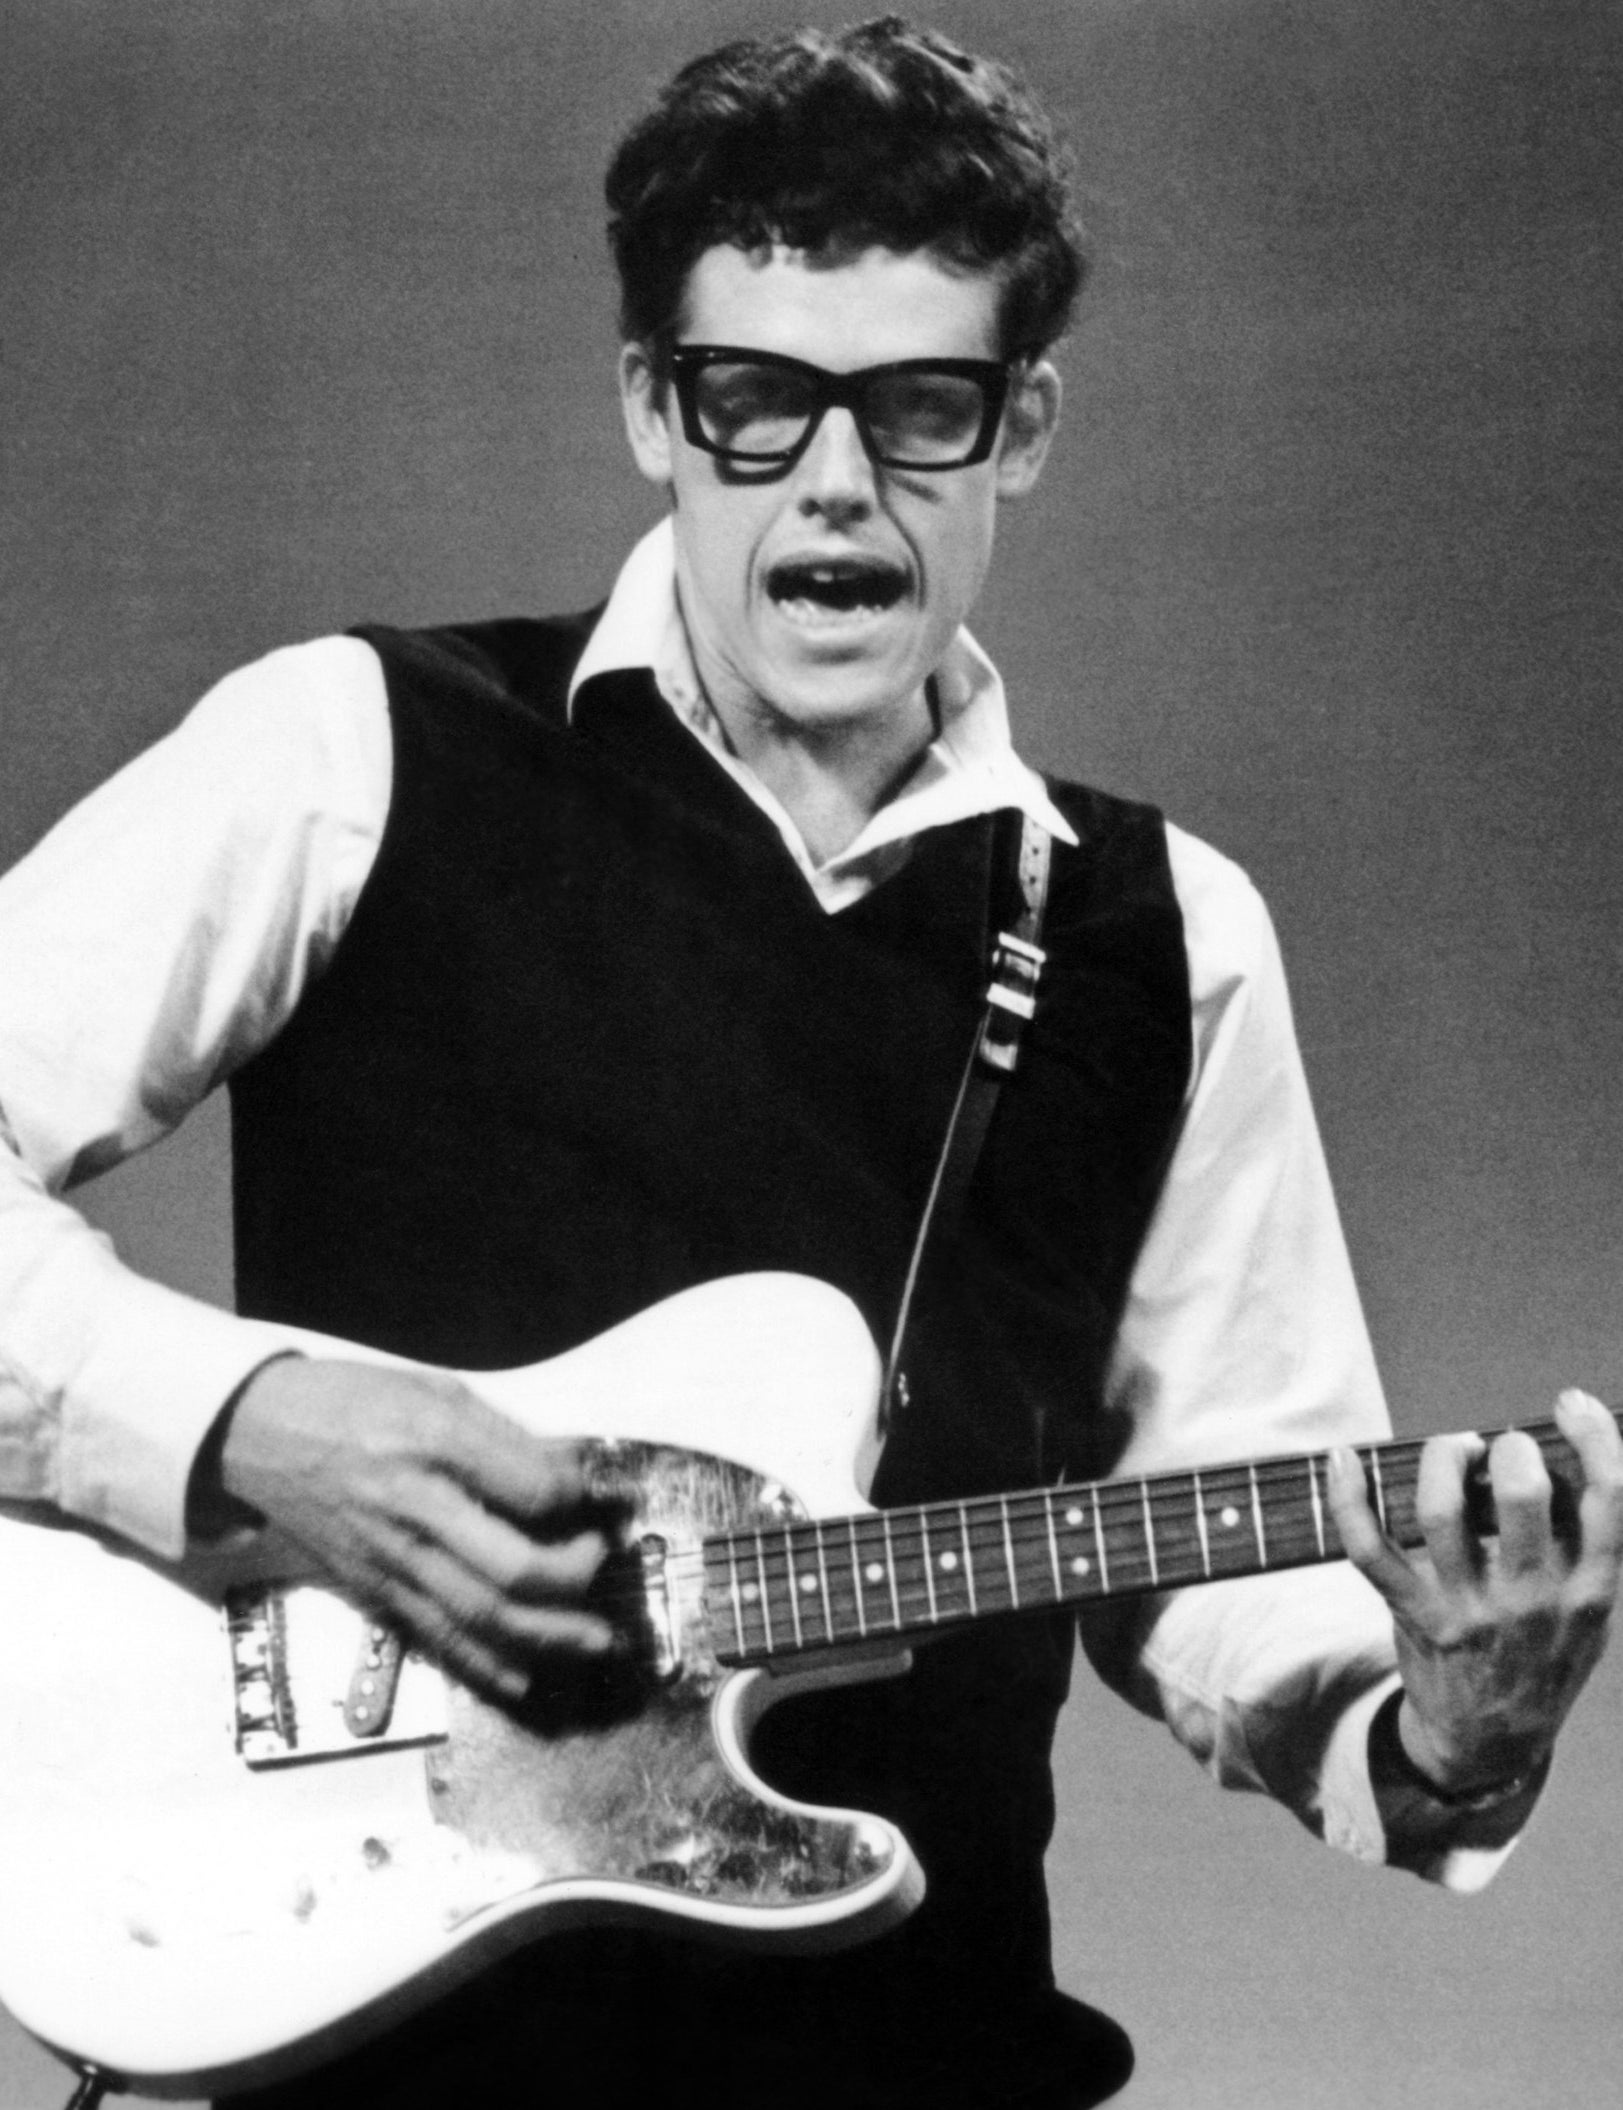 Gary Busey playing guitar and dressed like Buddy Holly